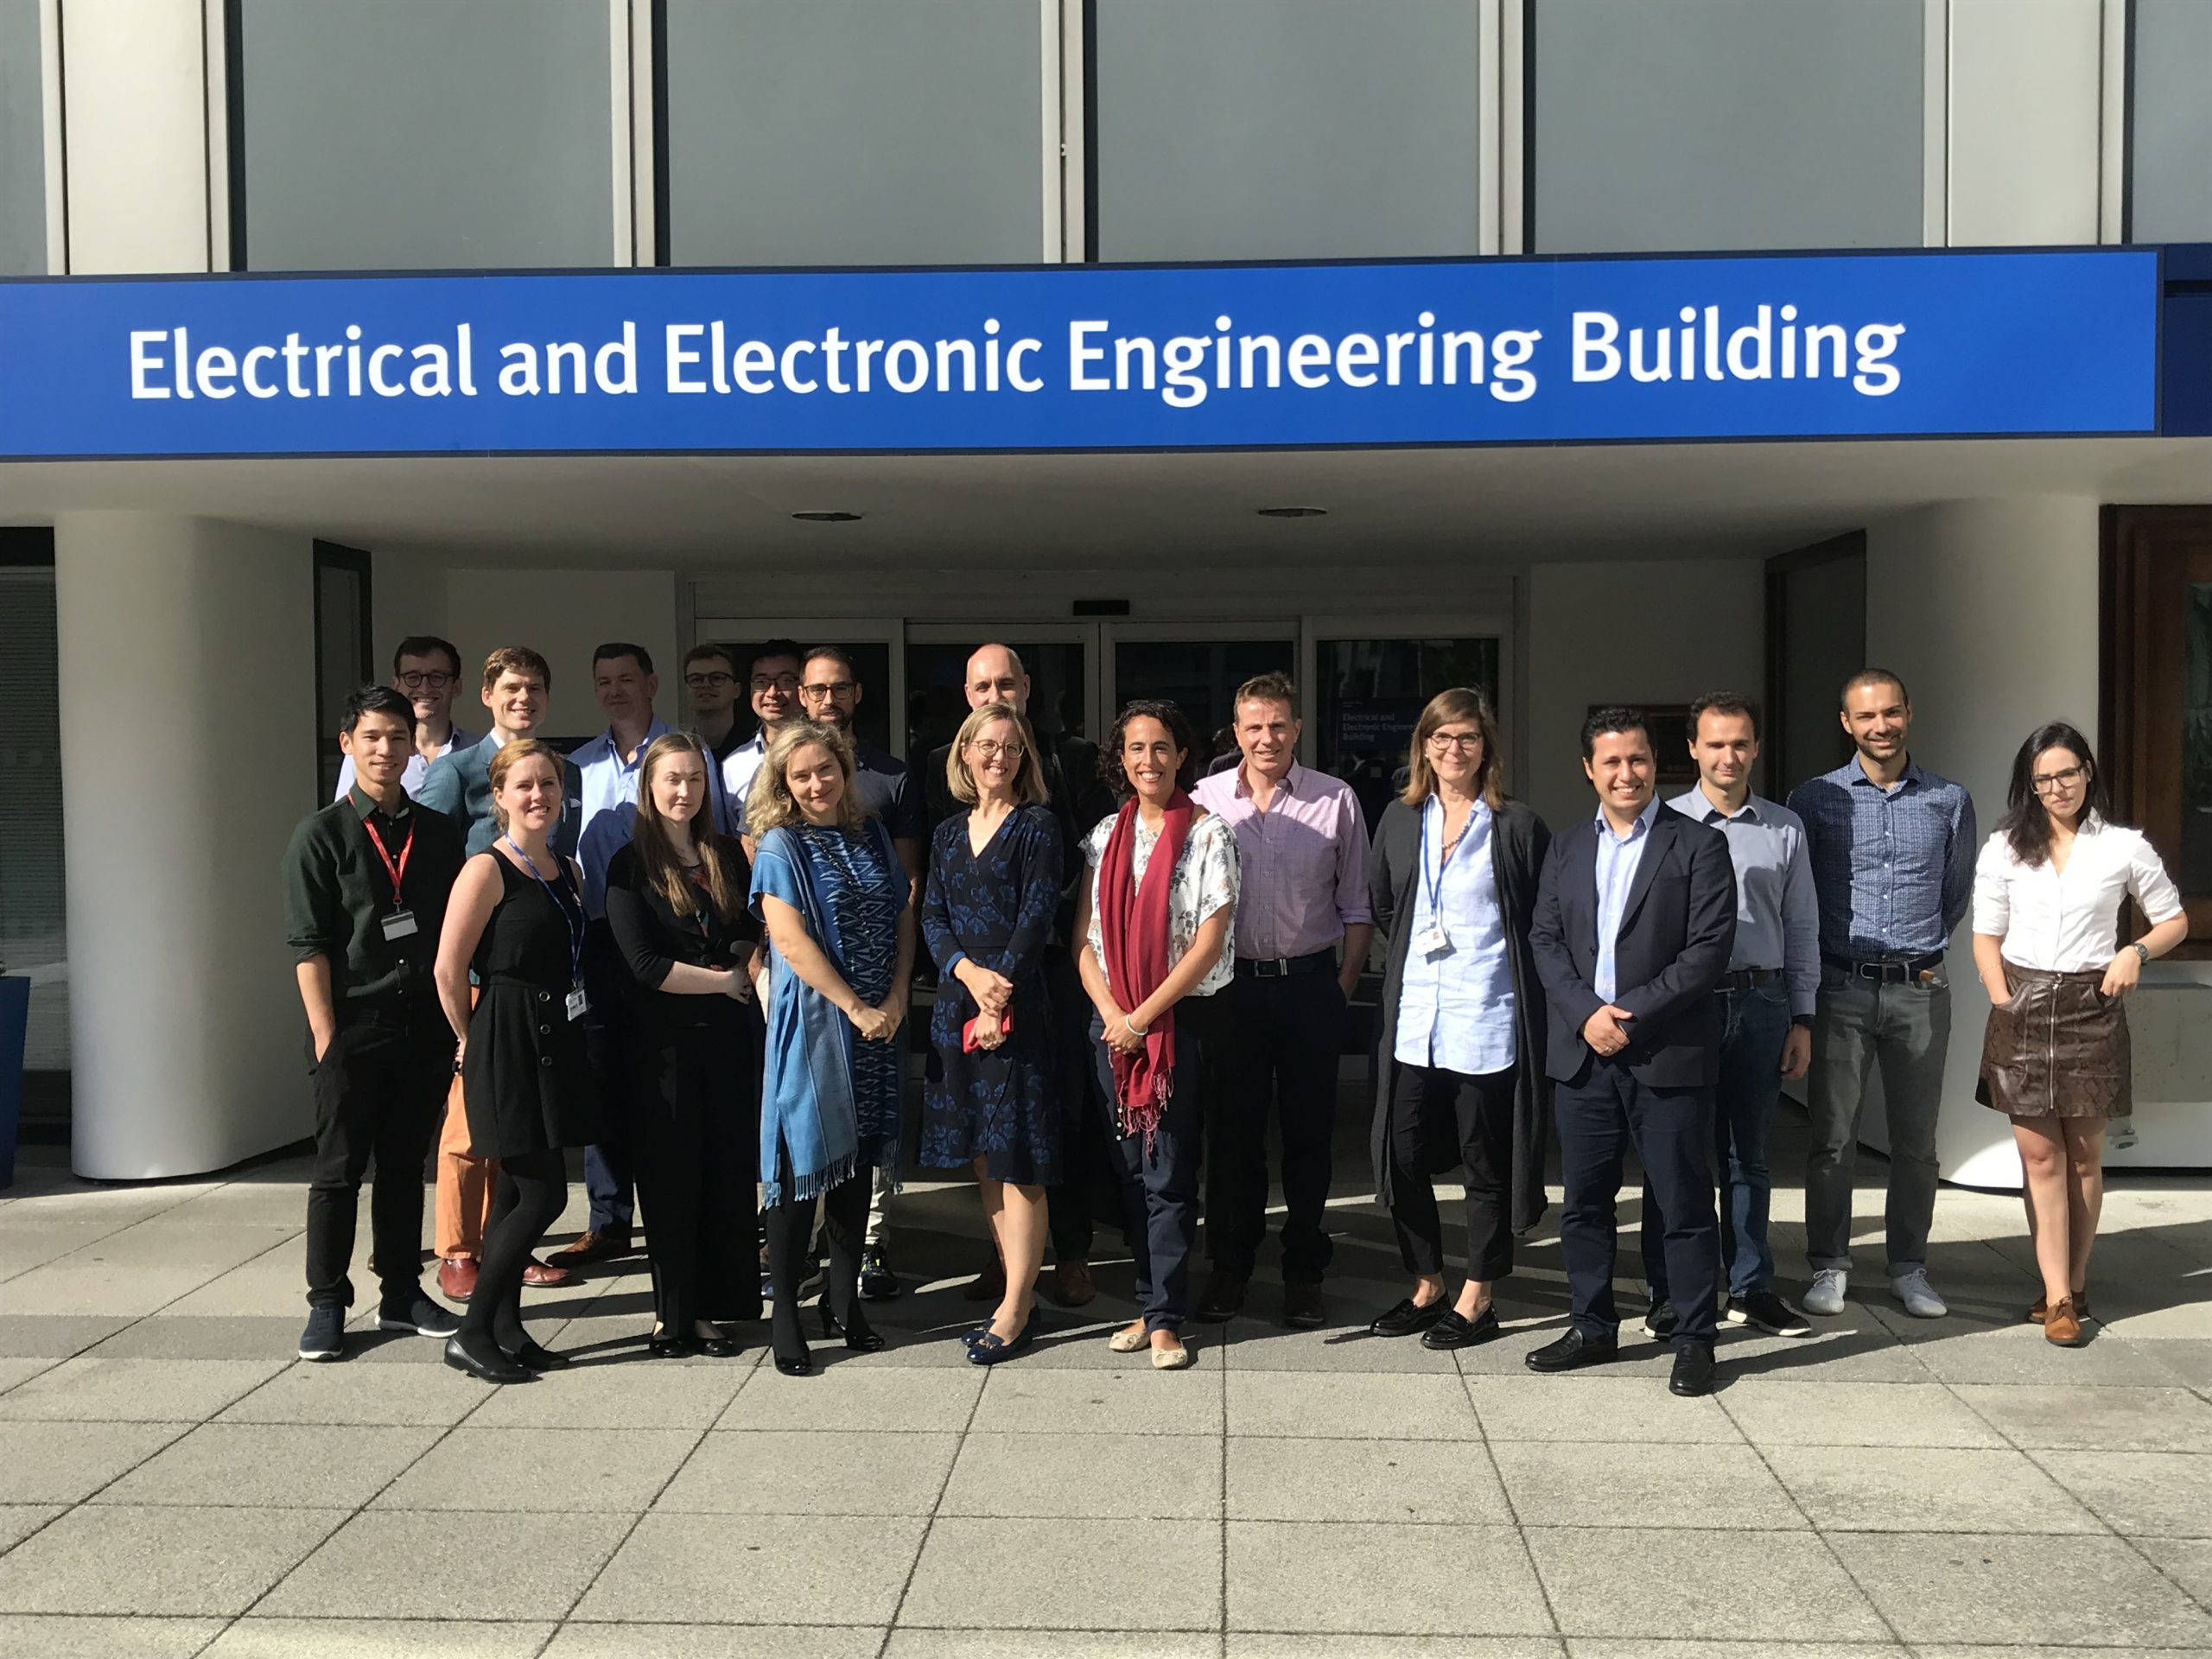 A workshop hosted by Imperial College London in September 2019